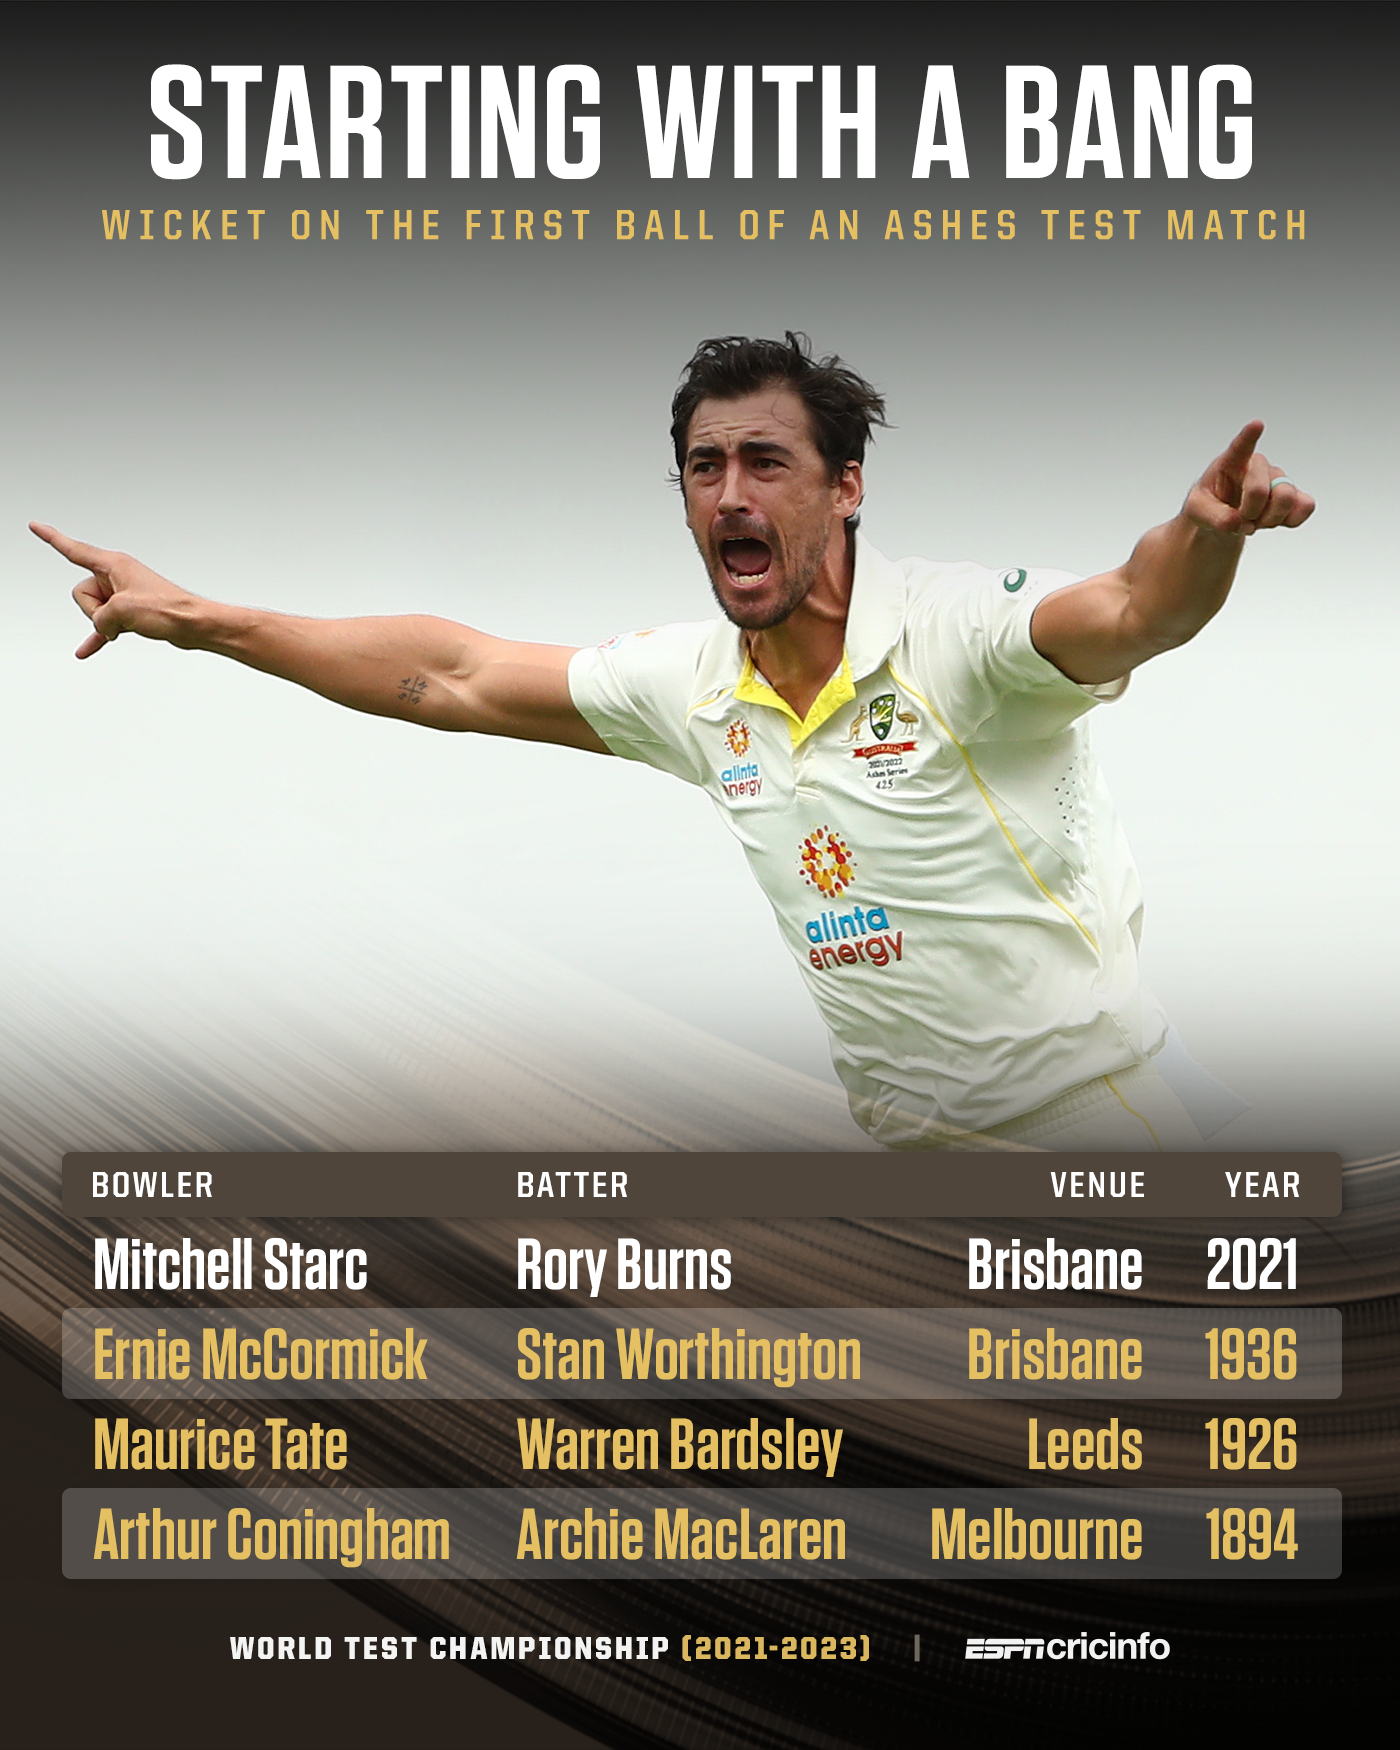 Wicket on the first ball of an Ashes Test ESPNcricinfo